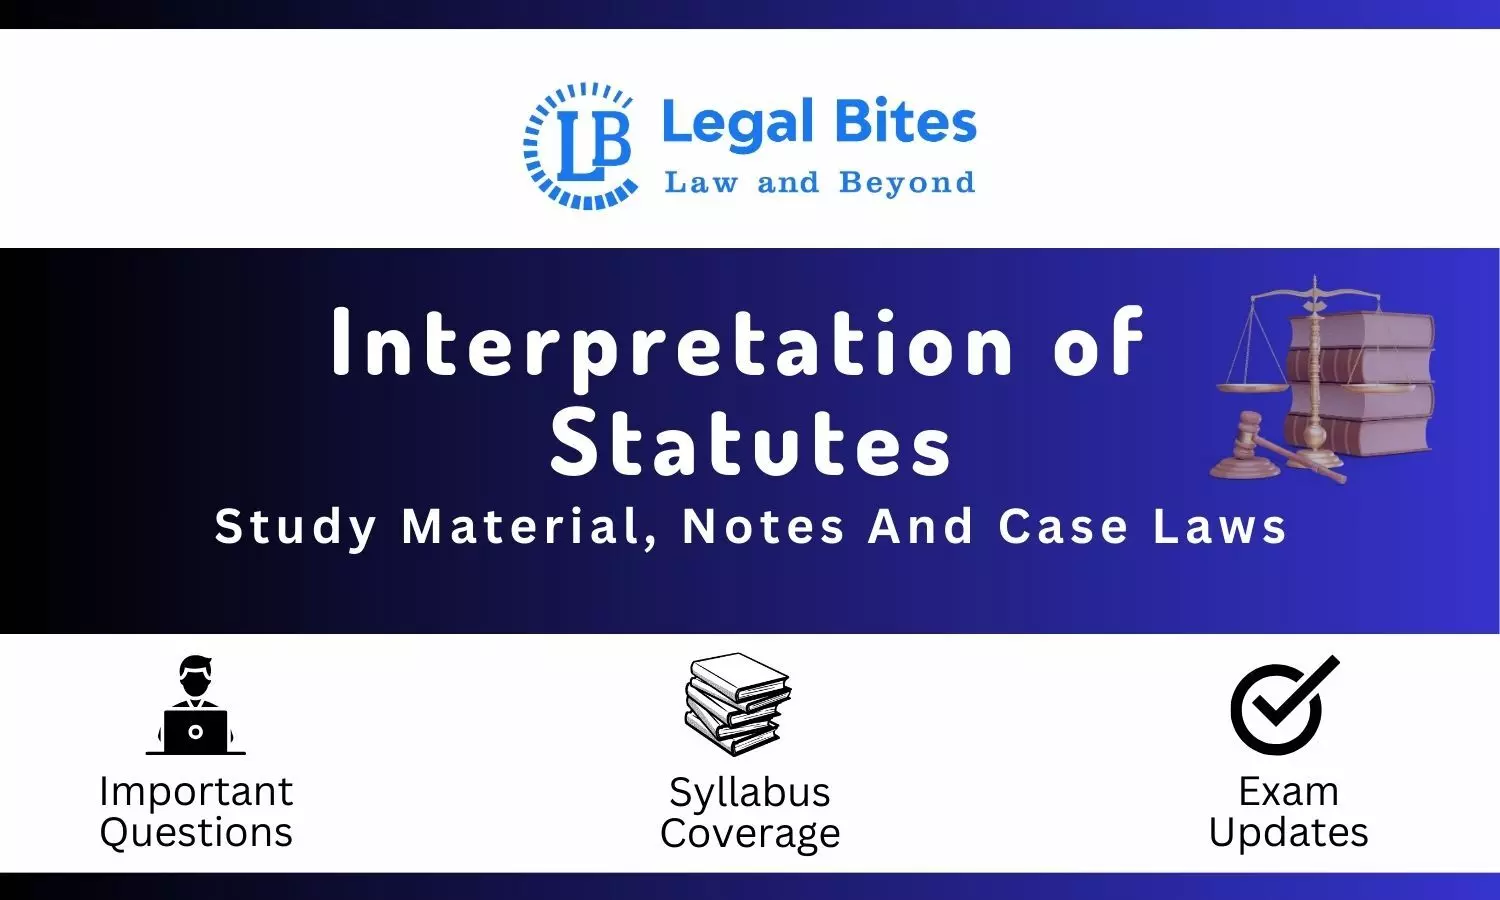 Interpretation of Statutes - Notes, Case Laws and Study Material